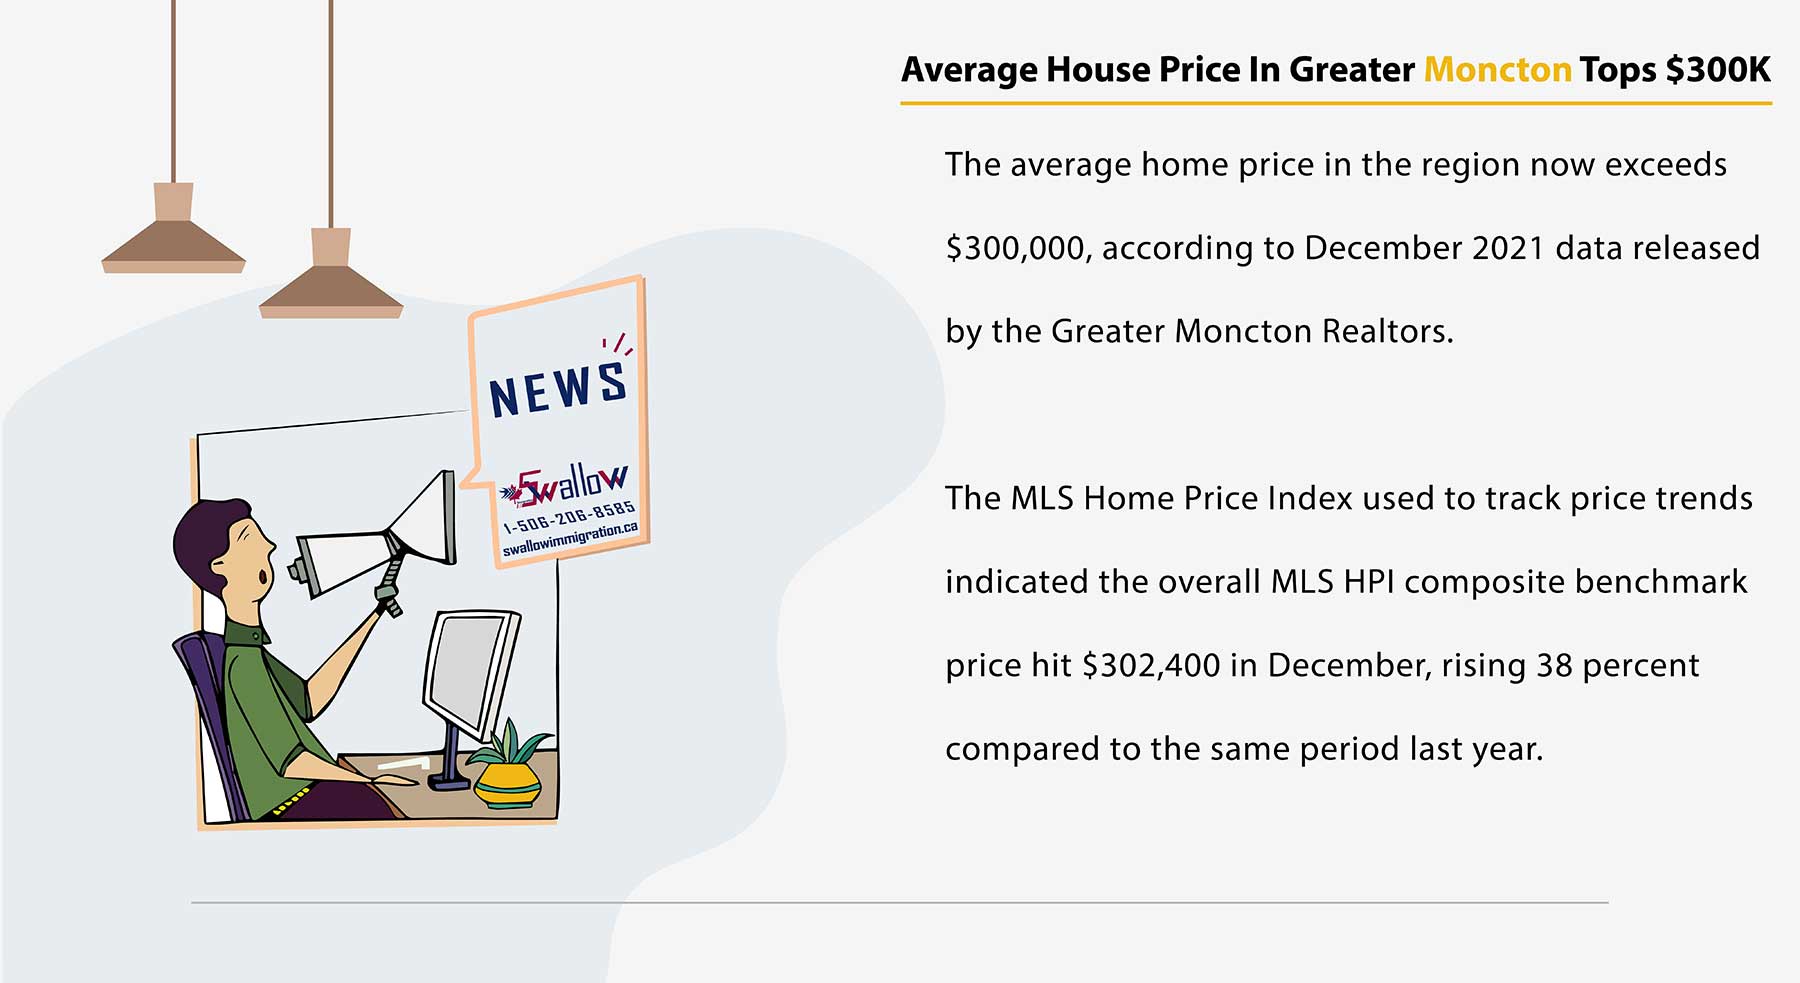 Average House Price In Greater Moncton Tops $300K